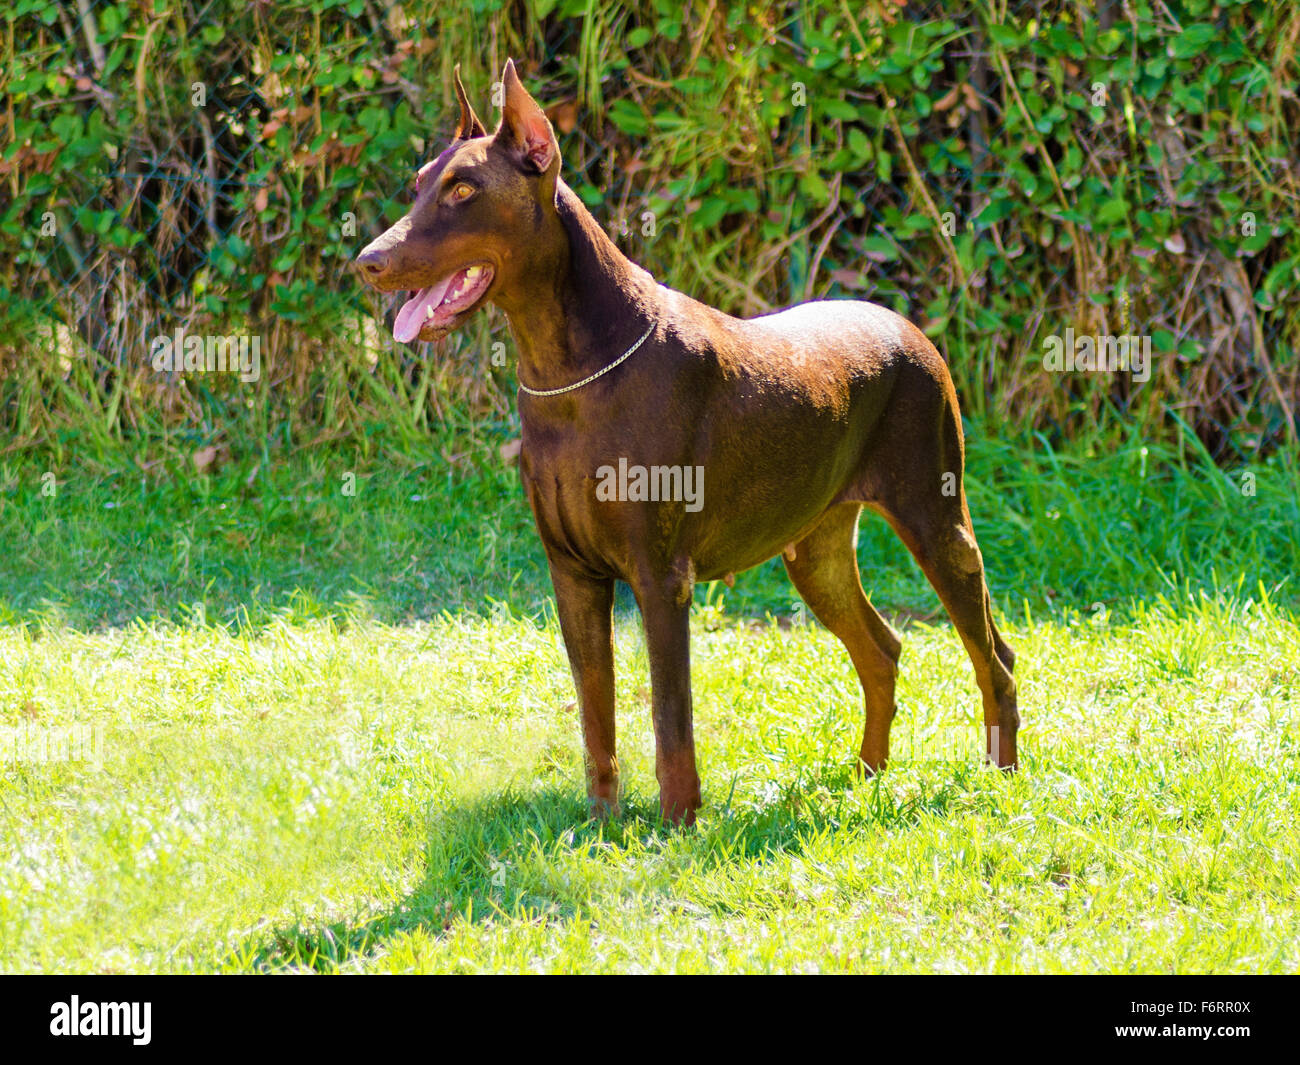 A young, beautiful, brown Doberman Pinscher standing on the lawn while sticking its tongue out and looking happy and playful. Th Stock Photo